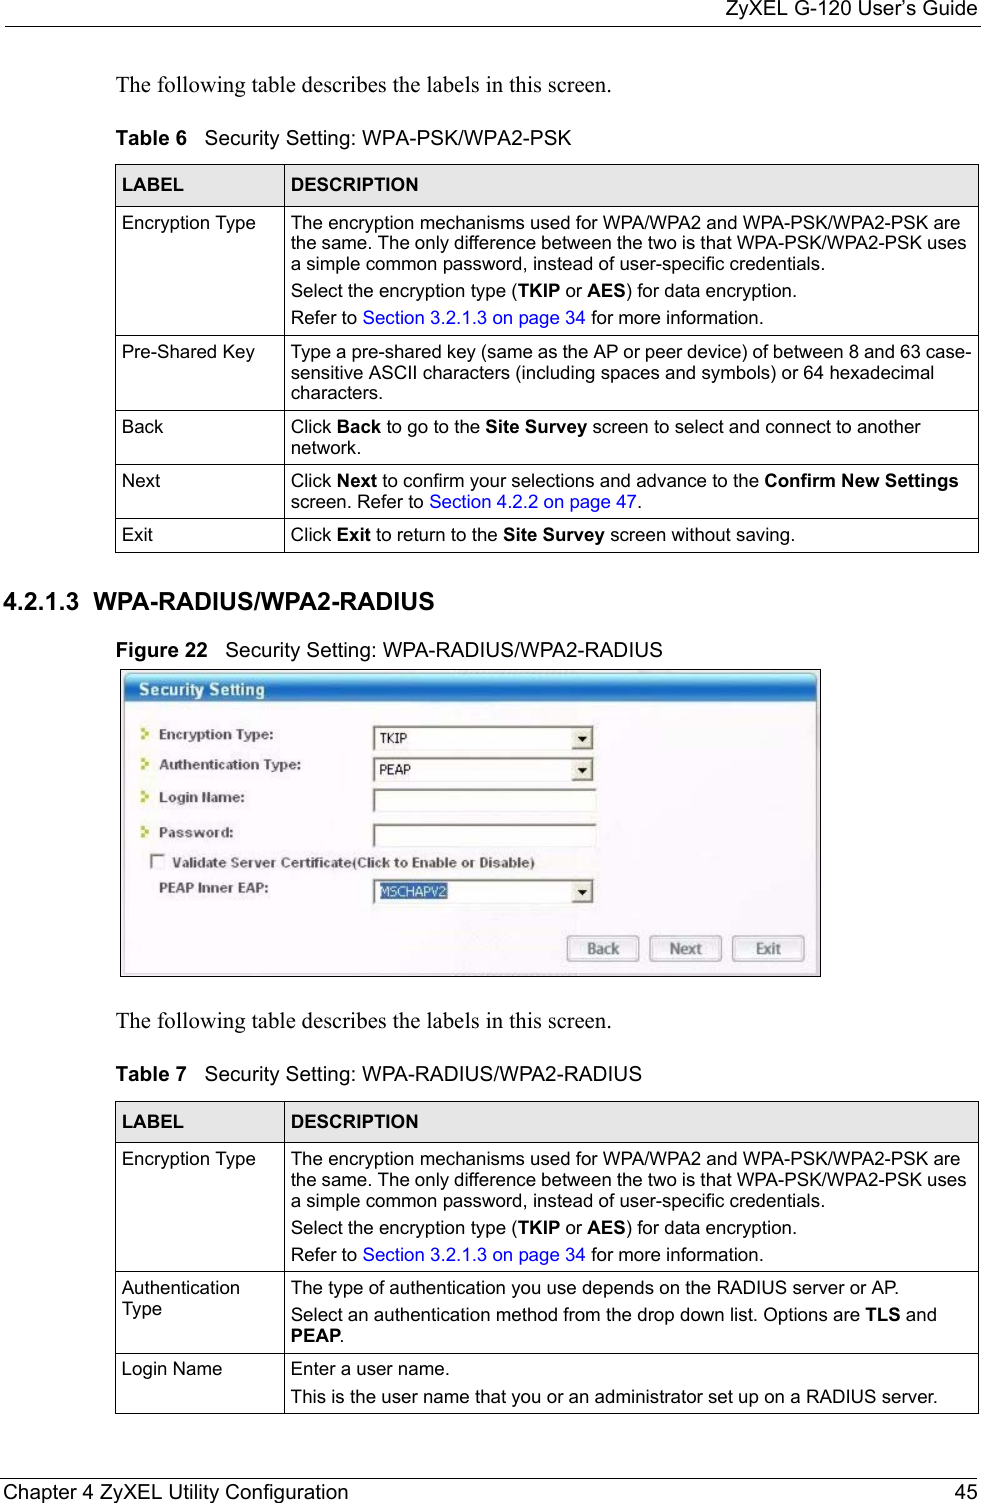 ZyXEL G-120 User’s GuideChapter 4 ZyXEL Utility Configuration 45The following table describes the labels in this screen. 4.2.1.3  WPA-RADIUS/WPA2-RADIUSFigure 22   Security Setting: WPA-RADIUS/WPA2-RADIUSThe following table describes the labels in this screen. Table 6   Security Setting: WPA-PSK/WPA2-PSKLABEL DESCRIPTIONEncryption Type The encryption mechanisms used for WPA/WPA2 and WPA-PSK/WPA2-PSK are the same. The only difference between the two is that WPA-PSK/WPA2-PSK uses a simple common password, instead of user-specific credentials.Select the encryption type (TKIP or AES) for data encryption.Refer to Section 3.2.1.3 on page 34 for more information.Pre-Shared Key Type a pre-shared key (same as the AP or peer device) of between 8 and 63 case-sensitive ASCII characters (including spaces and symbols) or 64 hexadecimal characters.Back Click Back to go to the Site Survey screen to select and connect to another network.Next Click Next to confirm your selections and advance to the Confirm New Settings screen. Refer to Section 4.2.2 on page 47. Exit Click Exit to return to the Site Survey screen without saving.Table 7   Security Setting: WPA-RADIUS/WPA2-RADIUSLABEL DESCRIPTIONEncryption Type The encryption mechanisms used for WPA/WPA2 and WPA-PSK/WPA2-PSK are the same. The only difference between the two is that WPA-PSK/WPA2-PSK uses a simple common password, instead of user-specific credentials.Select the encryption type (TKIP or AES) for data encryption.Refer to Section 3.2.1.3 on page 34 for more information.Authentication TypeThe type of authentication you use depends on the RADIUS server or AP.Select an authentication method from the drop down list. Options are TLS and PEAP.Login Name Enter a user name. This is the user name that you or an administrator set up on a RADIUS server.